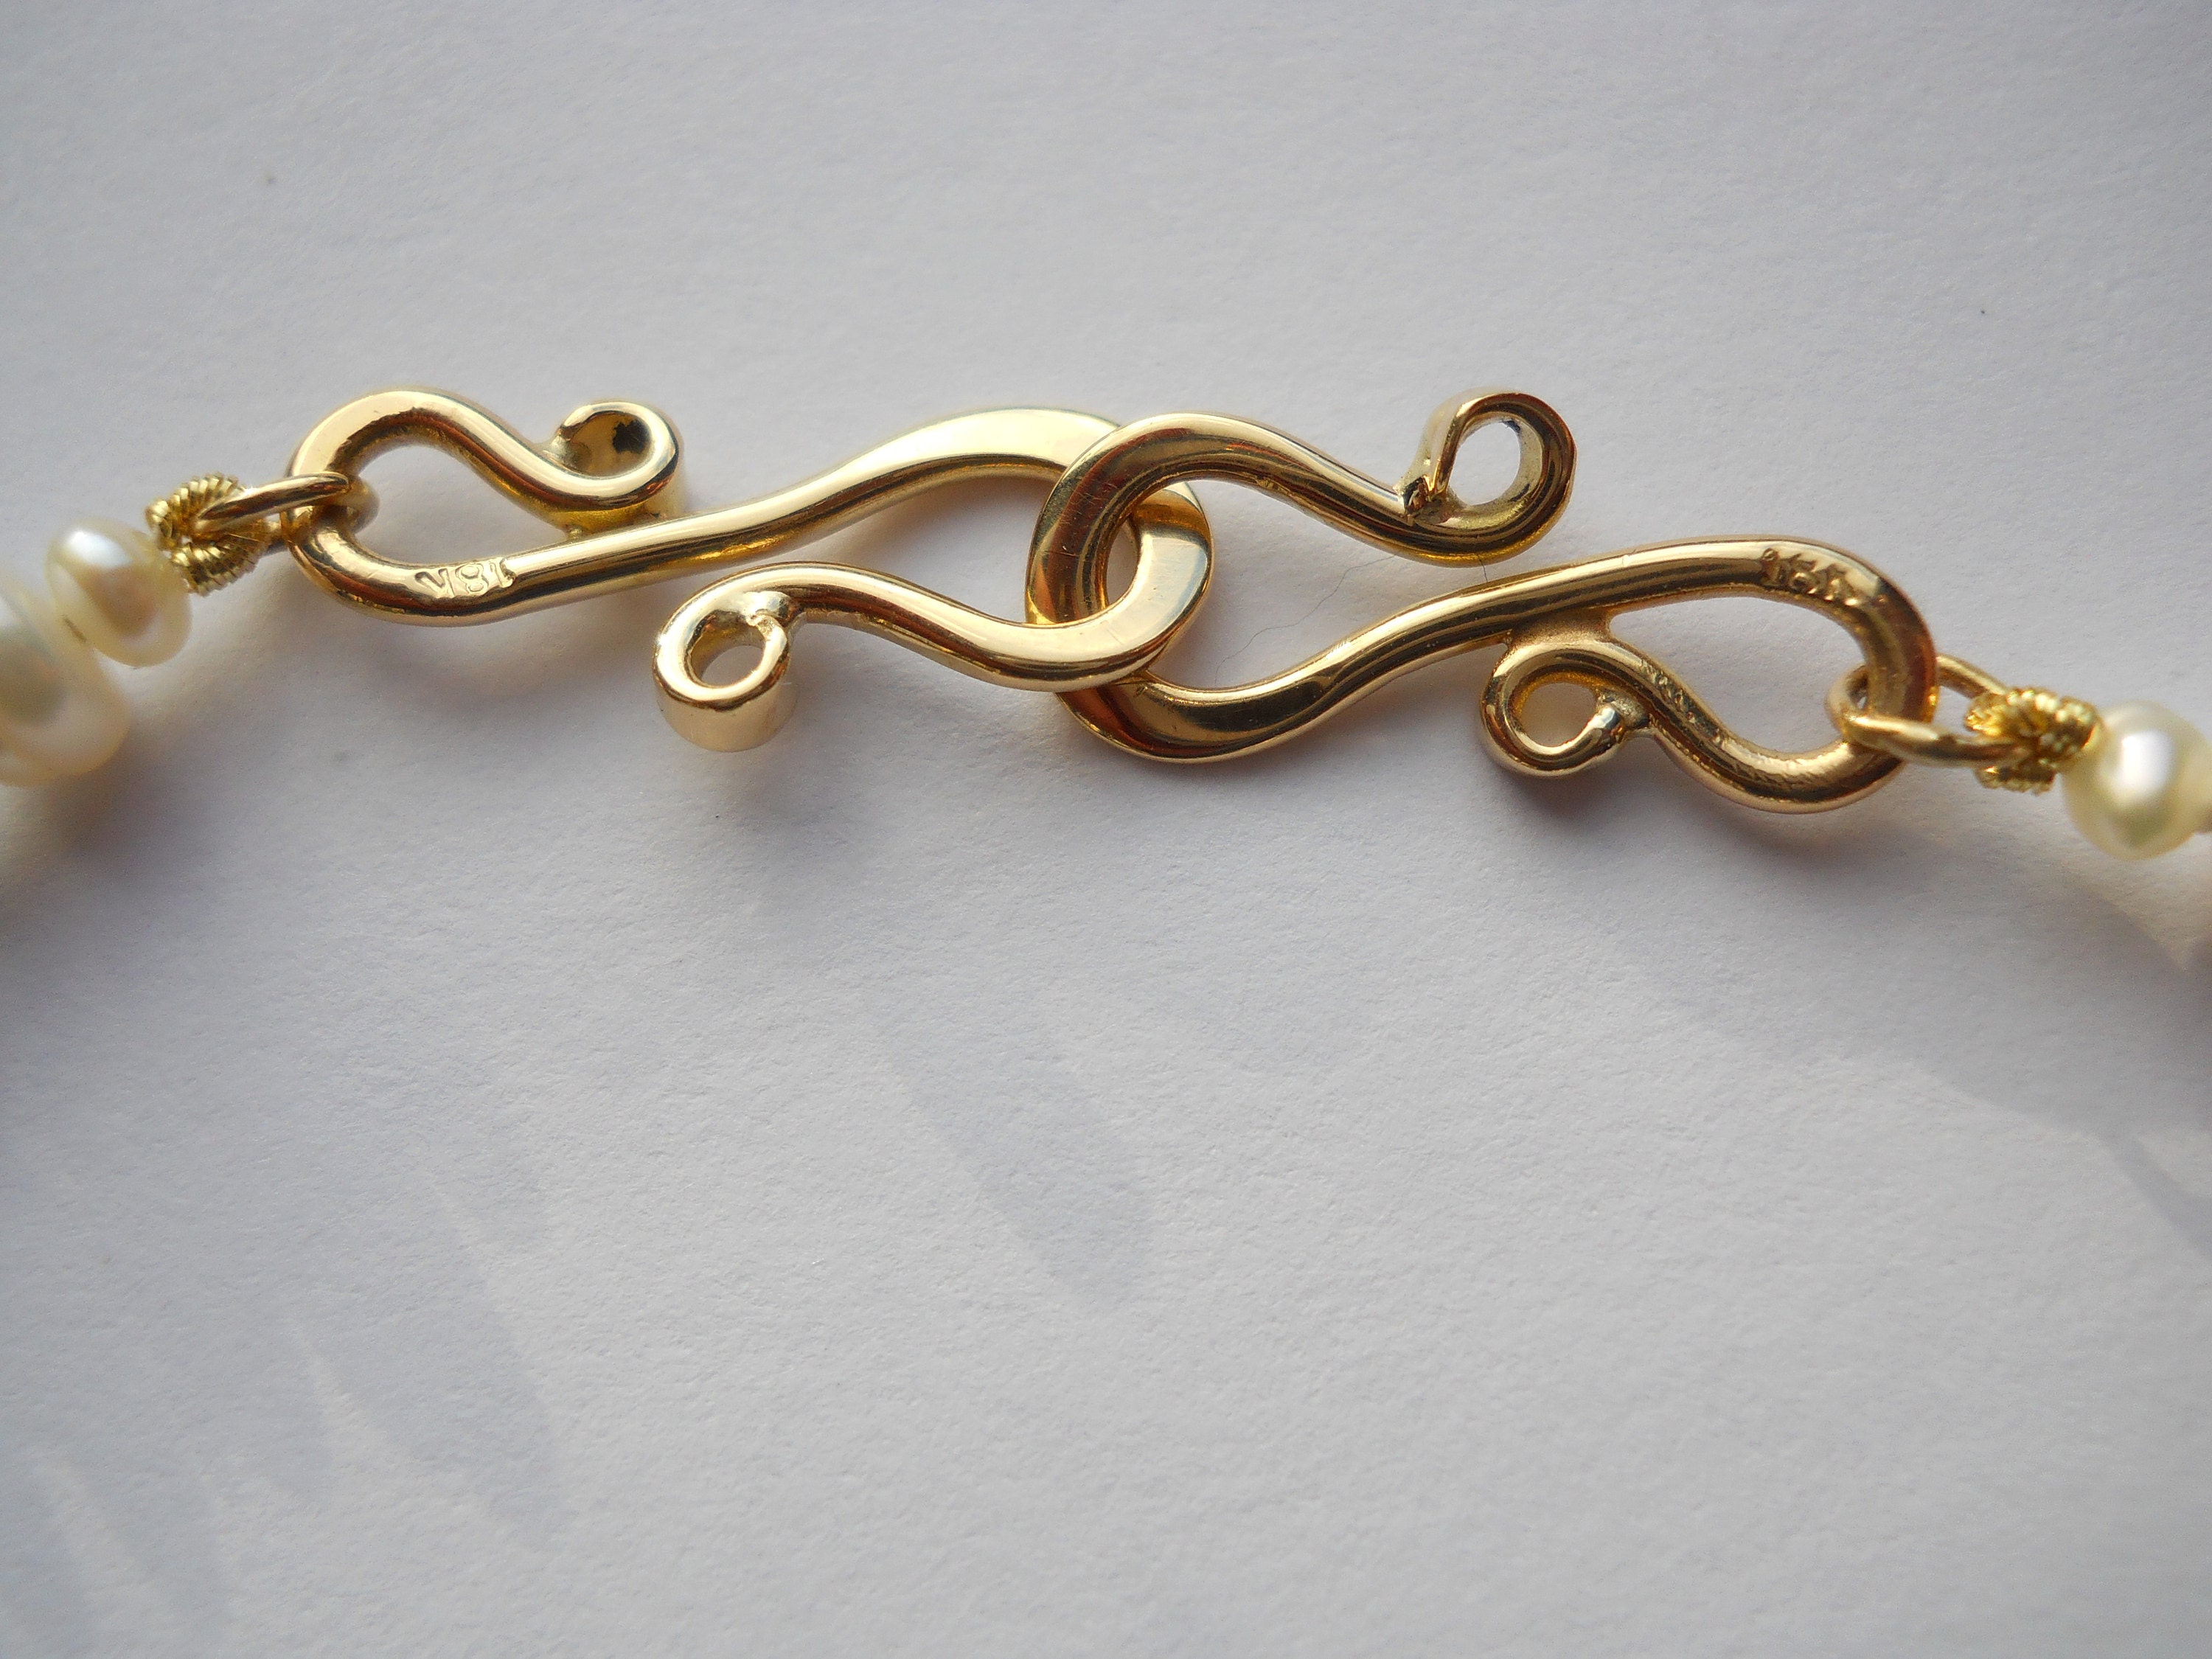 18K gold hand forged clasp details.